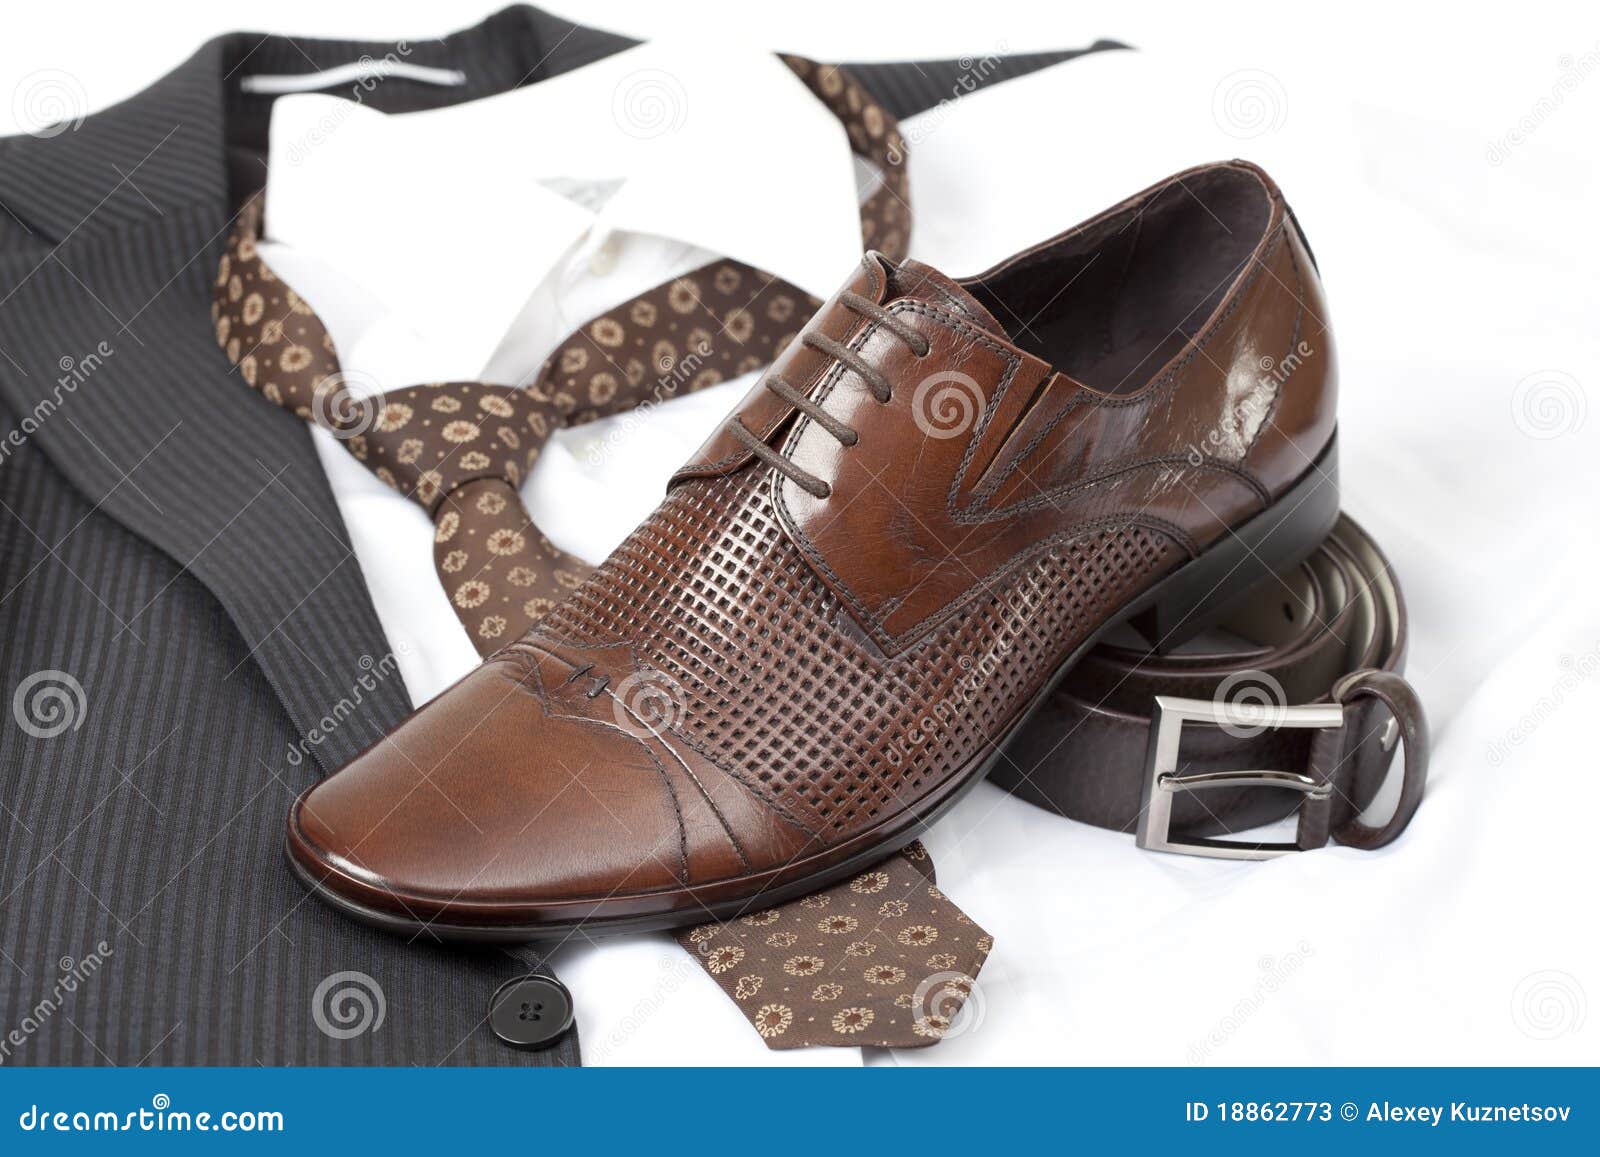 Formal wear and shoes stock image. Image of button, belt - 18862773